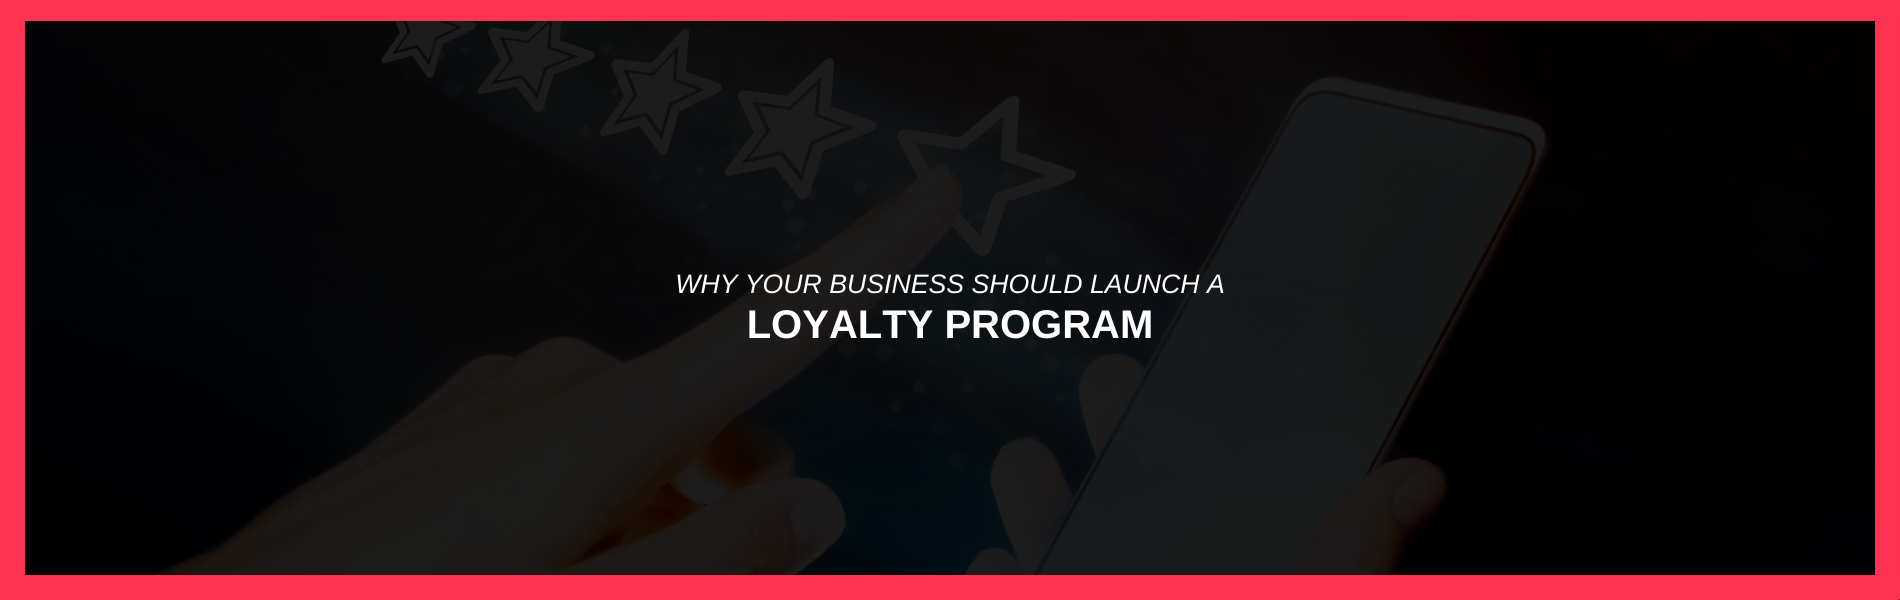 Why Should My Business Launch a Loyalty Program?